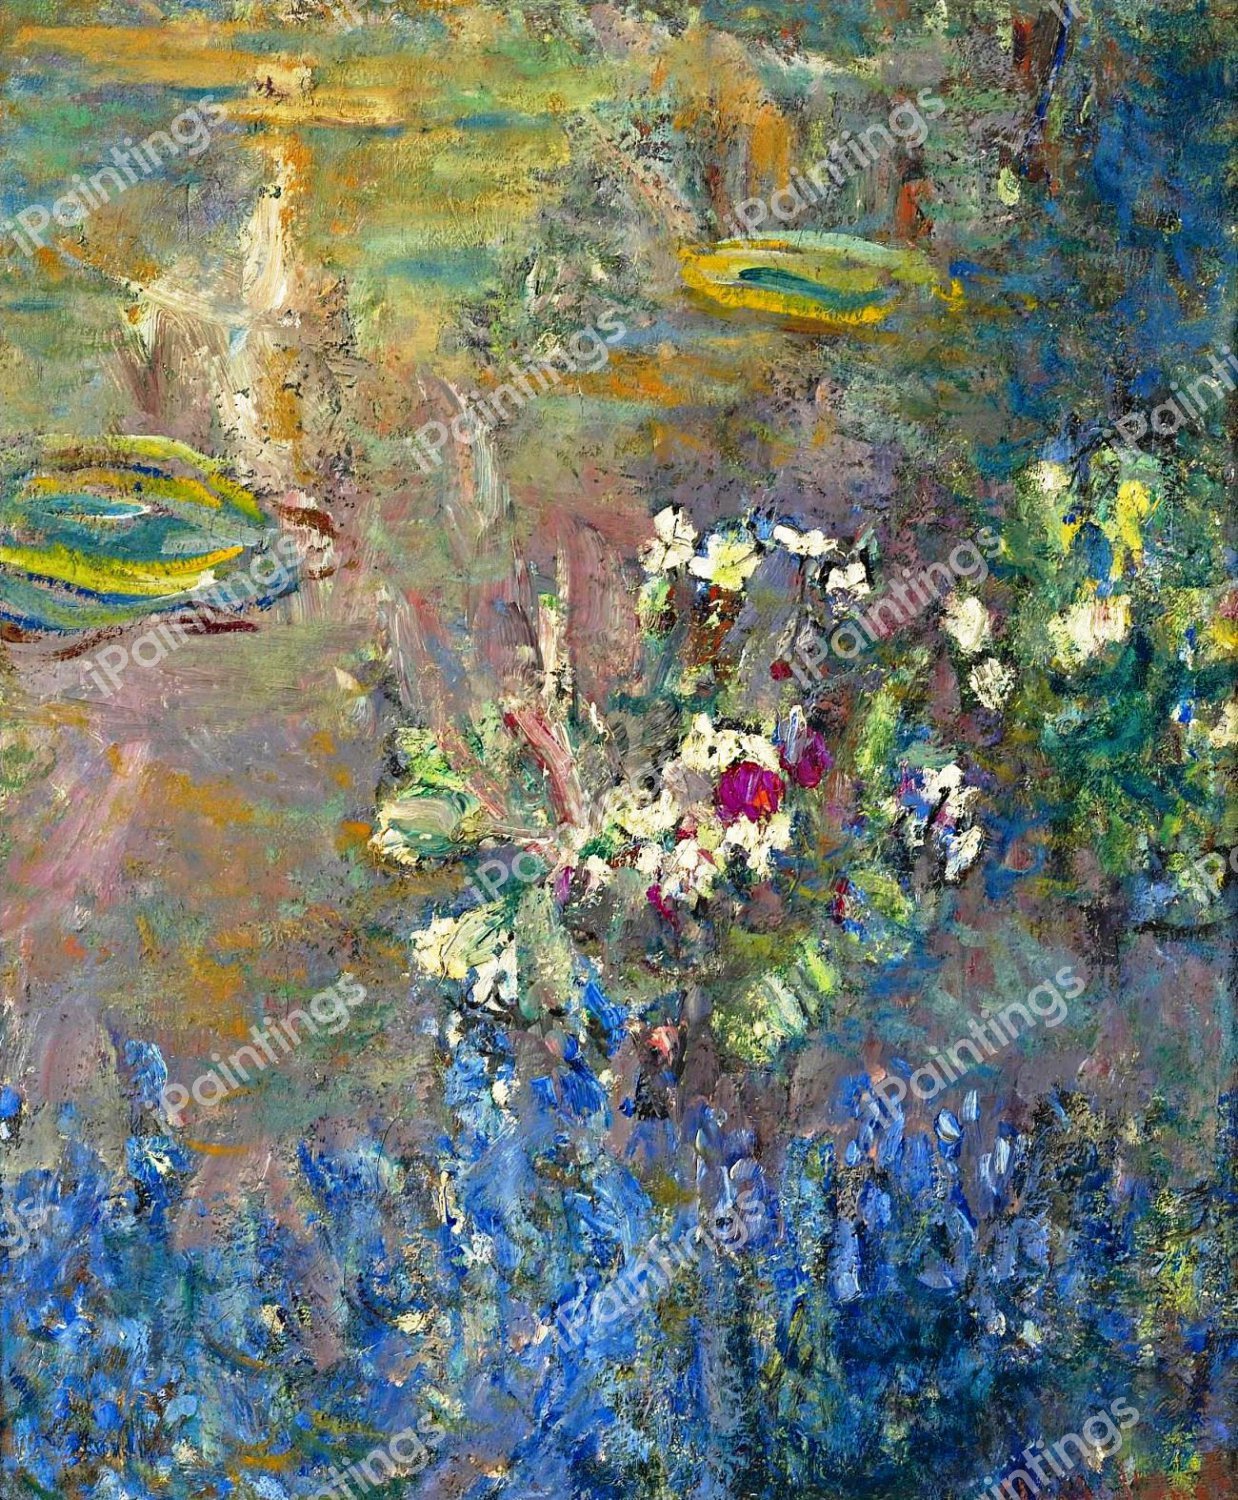 Water Lilies 5, 1918 Painting by Claude Monet Reproduction | iPaintings.com